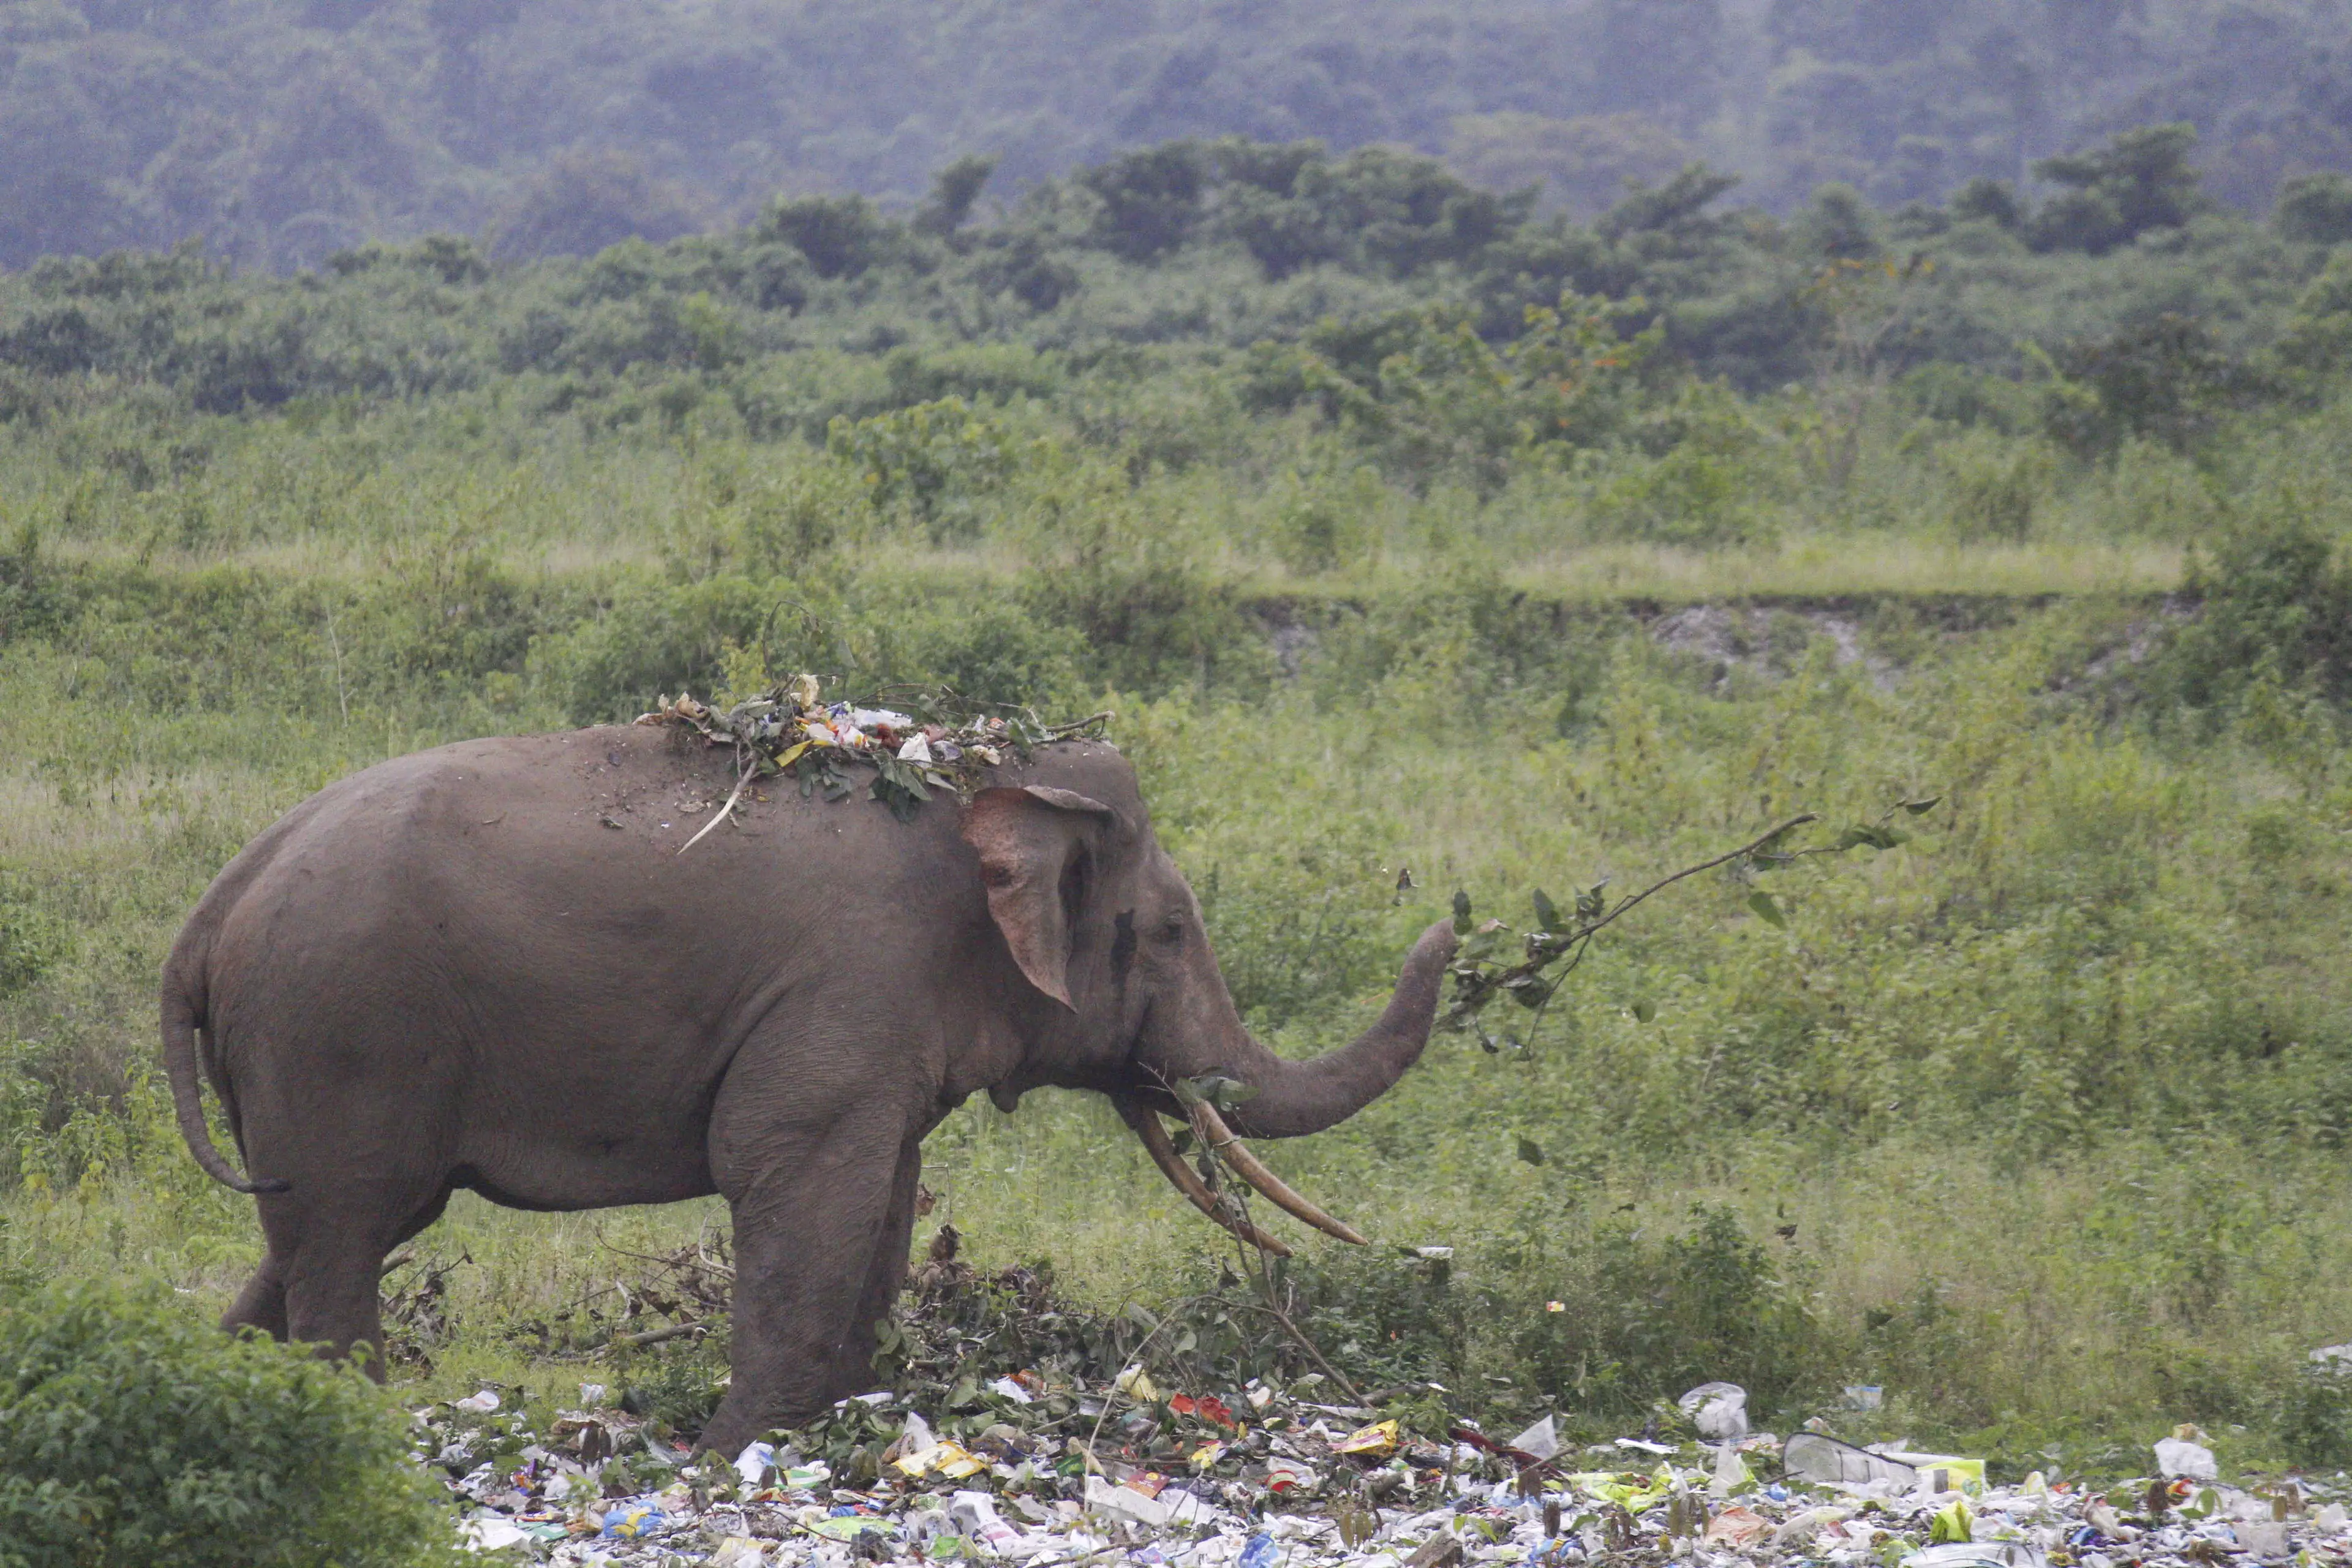 The elephant could be seen 'snacking on plastic'.